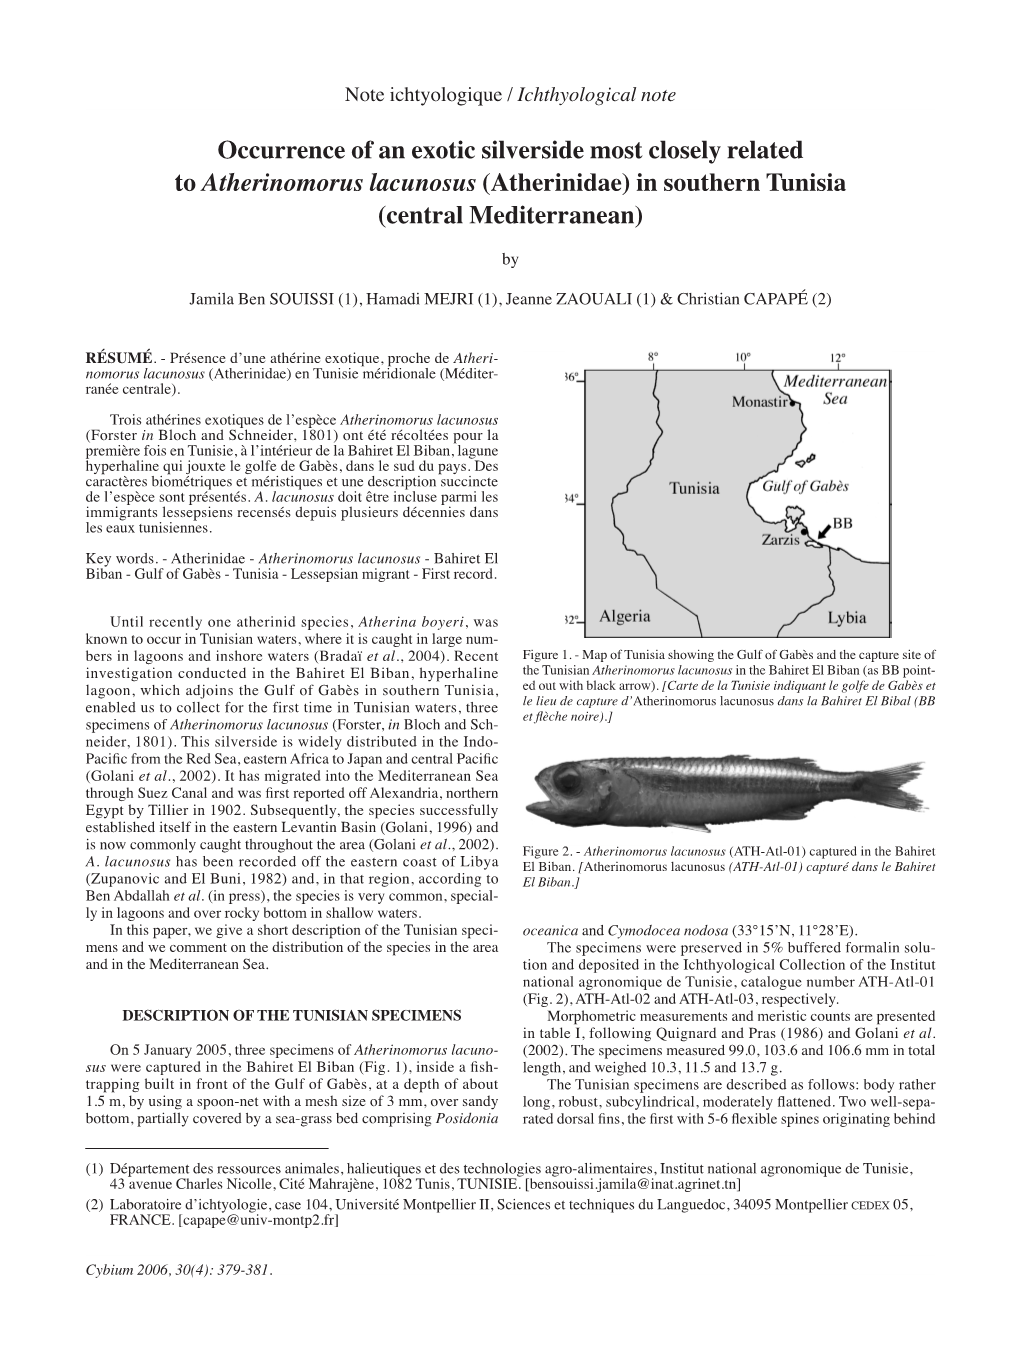 Occurrence of an Exotic Silverside Most Closely Related to Atherinomorus Lacunosus (Atherinidae) in Southern Tunisia (Central Mediterranean)